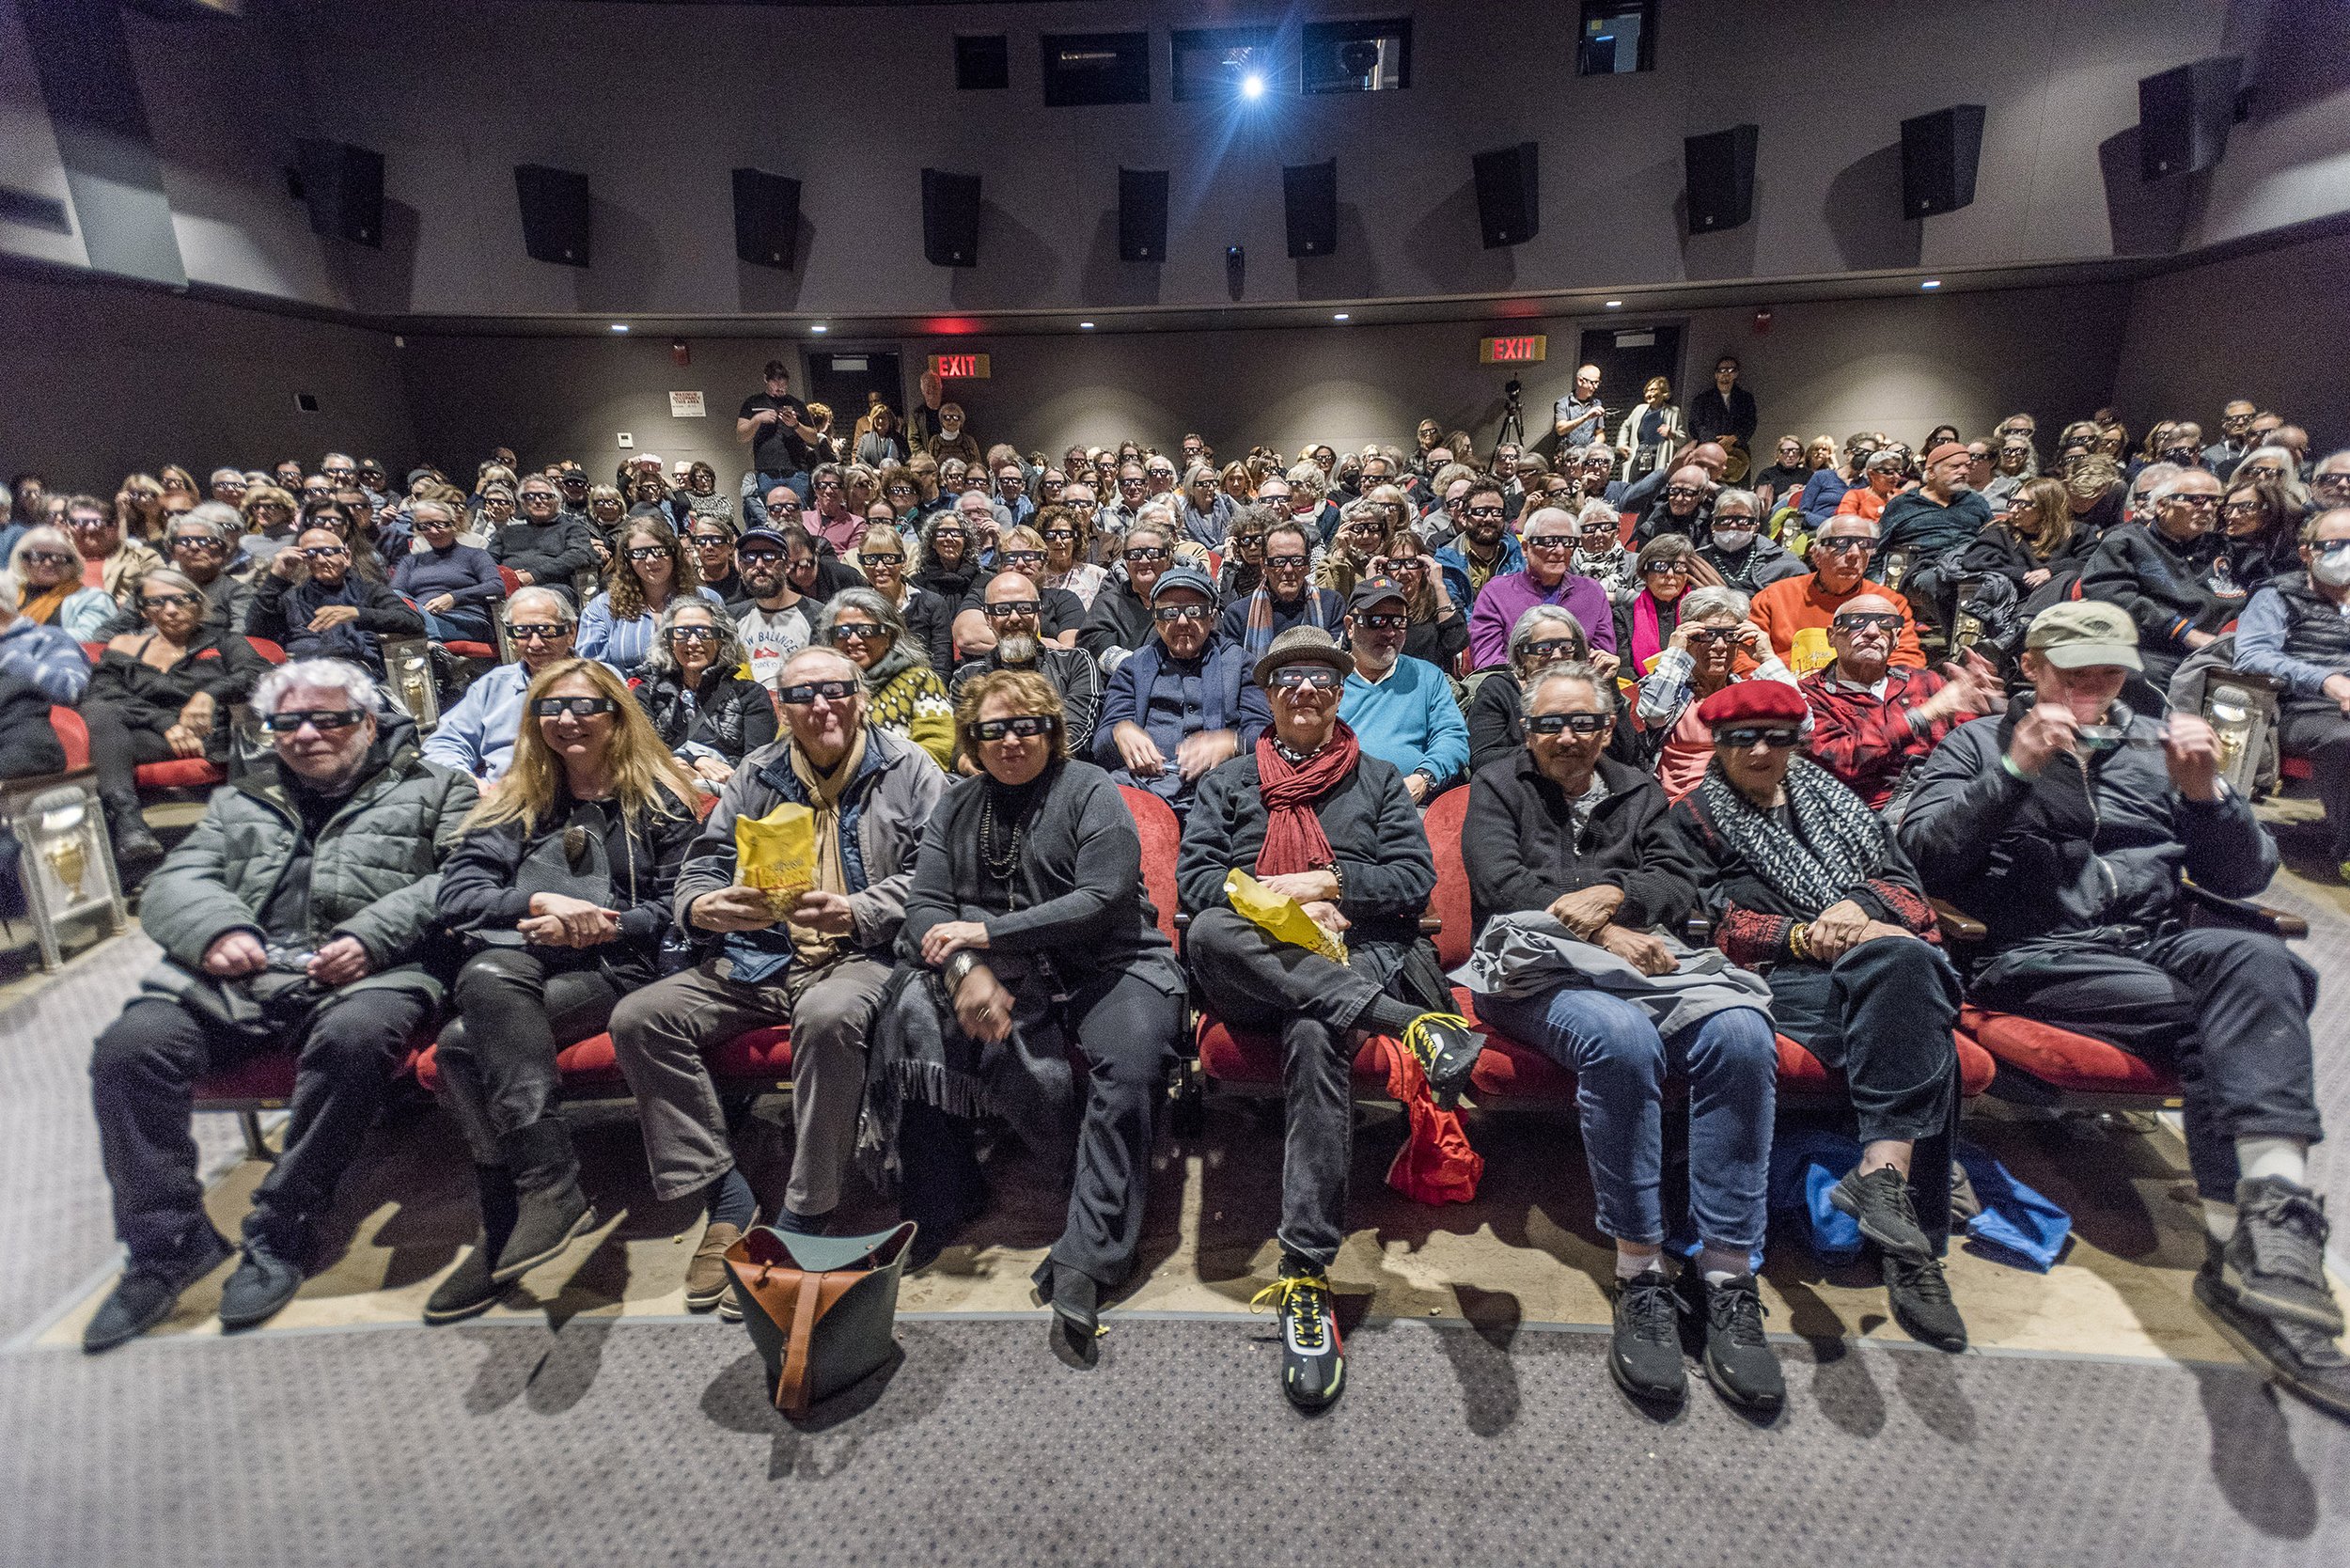 Anselm audience with their 3-D glasses fill the Sag Harbor Cinema